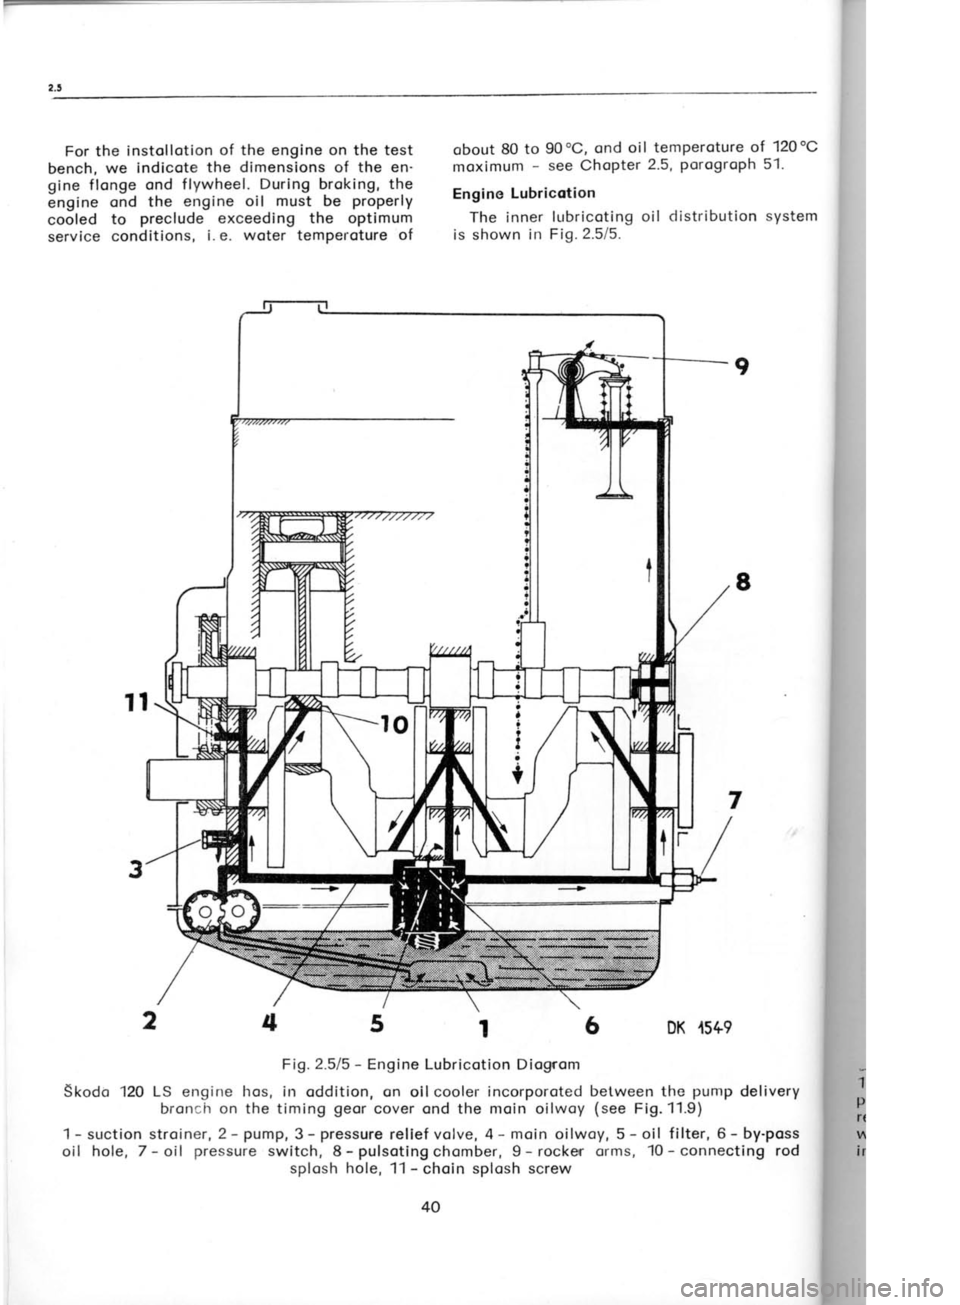 SKODA 120 LS 1980  Workshop Manual For the 
instol lotion  of the engine on the test
bench,  we indicote  the dimensions 
of the en
gine flonge  ond flywheel.  During broking,  the
engine  qnd 
the engine oil  must 
be properly
cooled